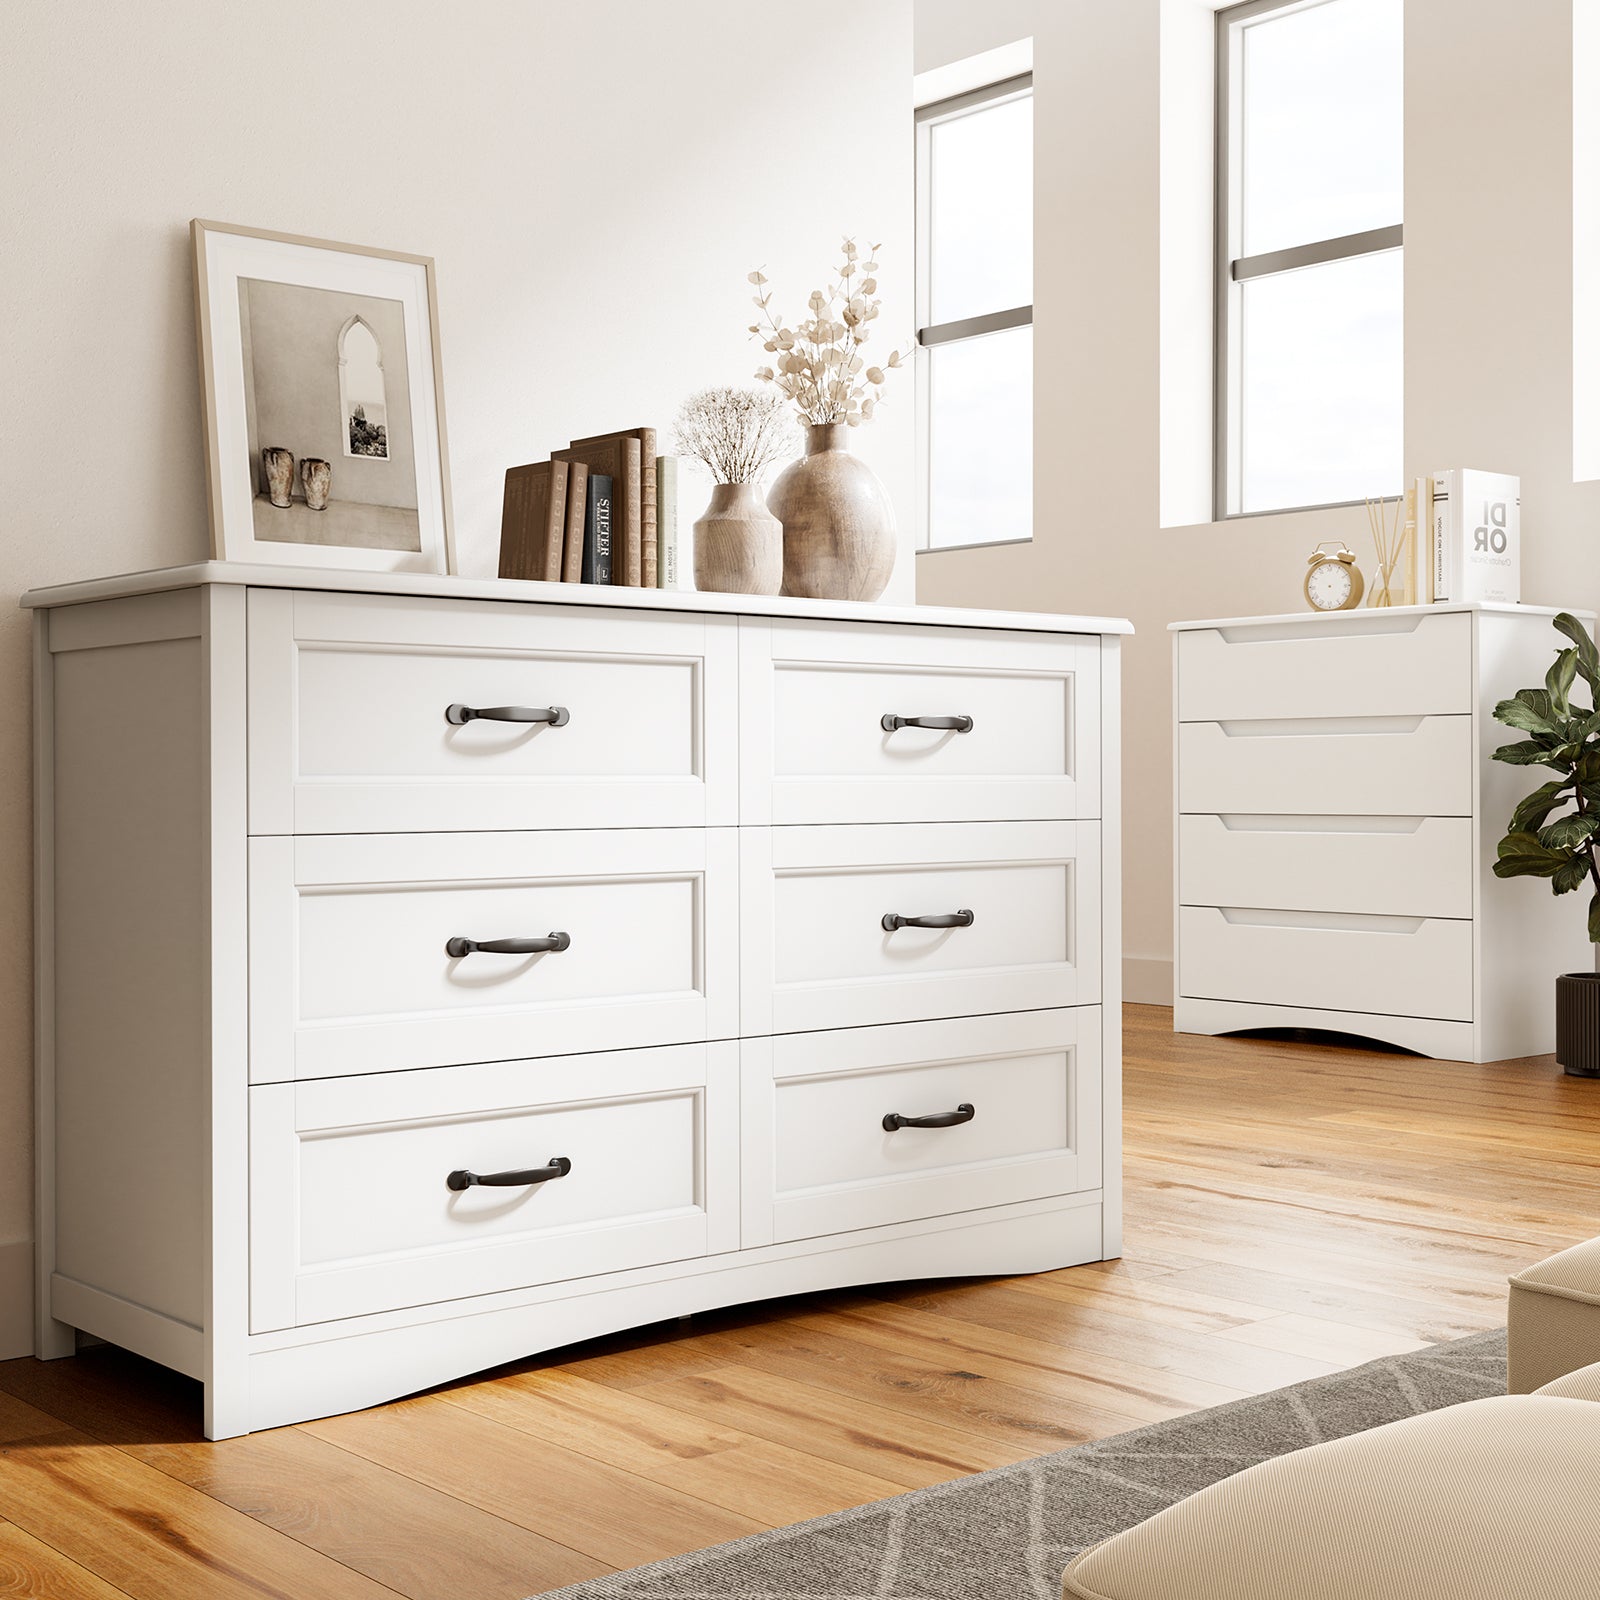 Gizoon AP40 6 Drawer Modern Wood Dresser with Mental Handle